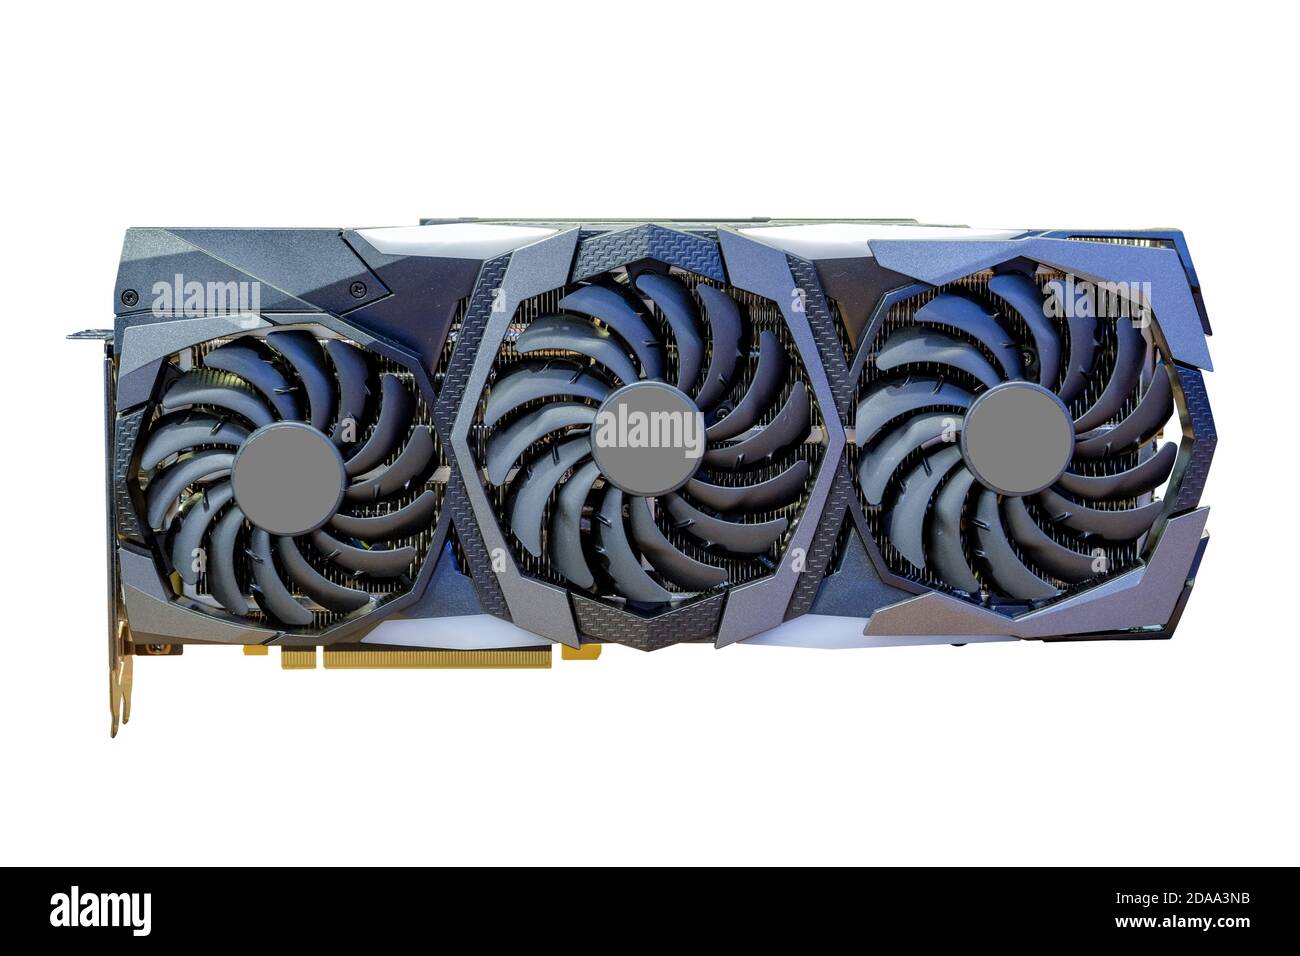 High performance graphic card new model and tripple fans cooling technology for computer desktop for work, isolated on white background Stock Photo